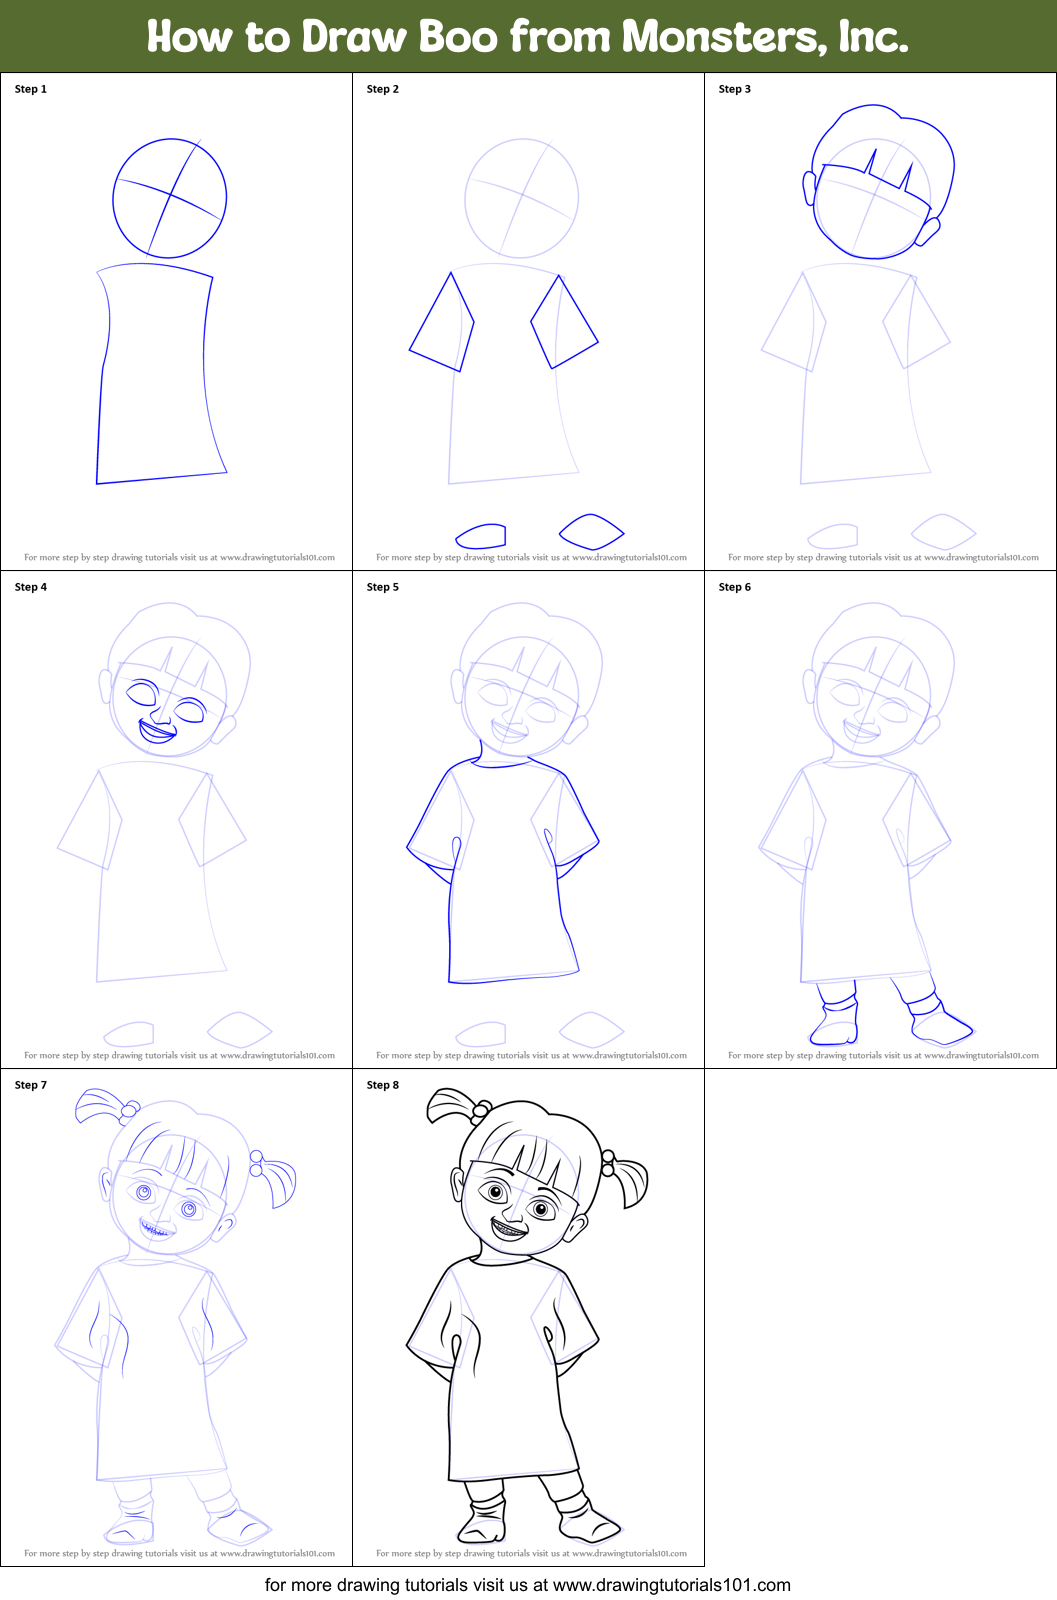 How to Draw Boo from Monsters, Inc. printable step by step drawing